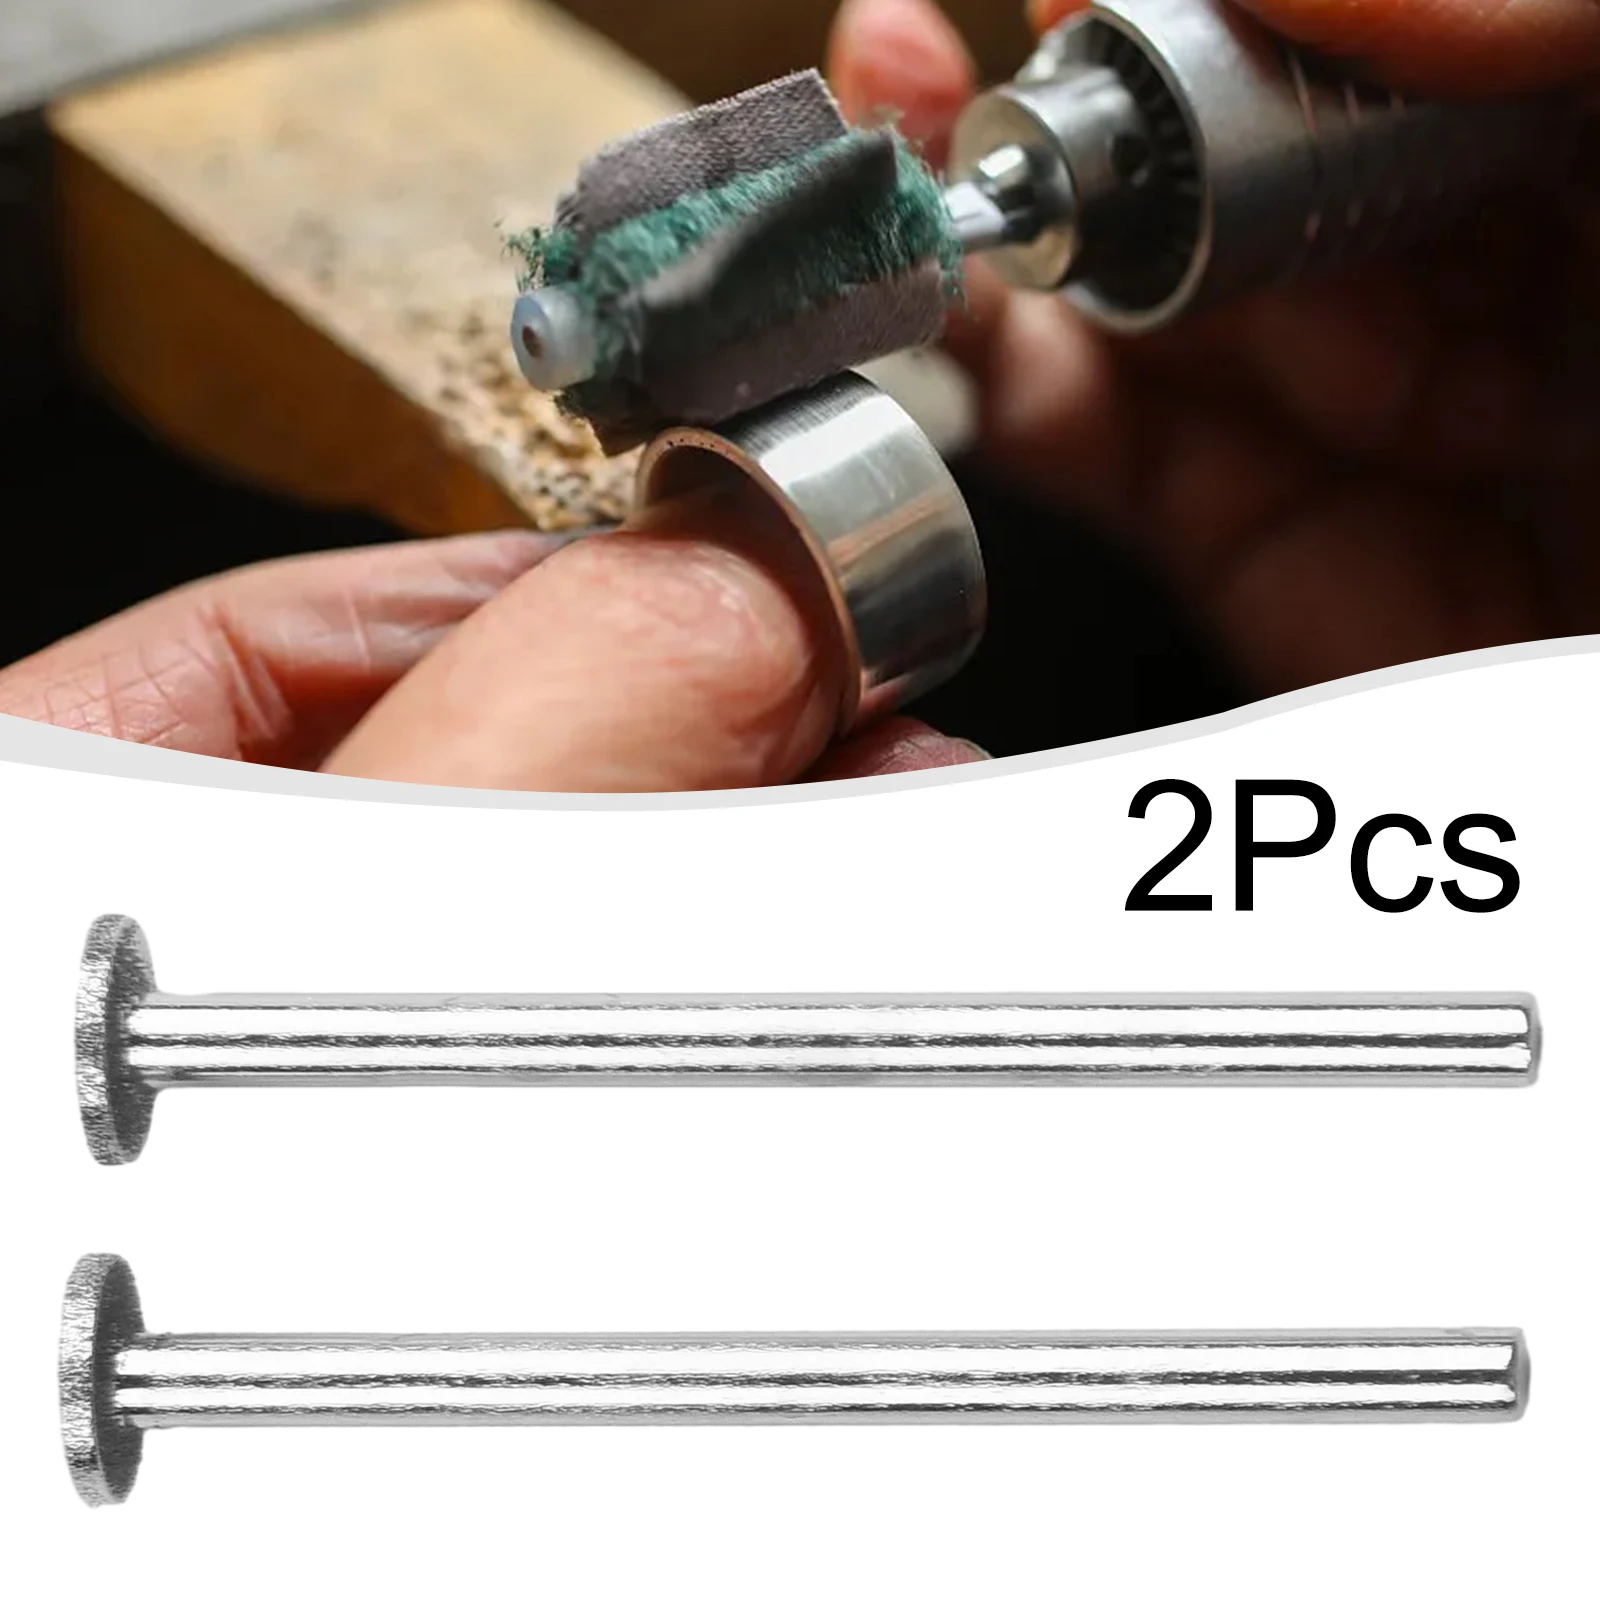 2pcs T Type Grinding Wheel 3mm Shank 6/8/10/10mm Head   45mm Length For The Polishing Of Jade Carving Stone Carving Welding Tool 2pcs mini diamond engraving bit 35mm carving pen point tools cnc milling cutter 90 degree circuit board metal stone